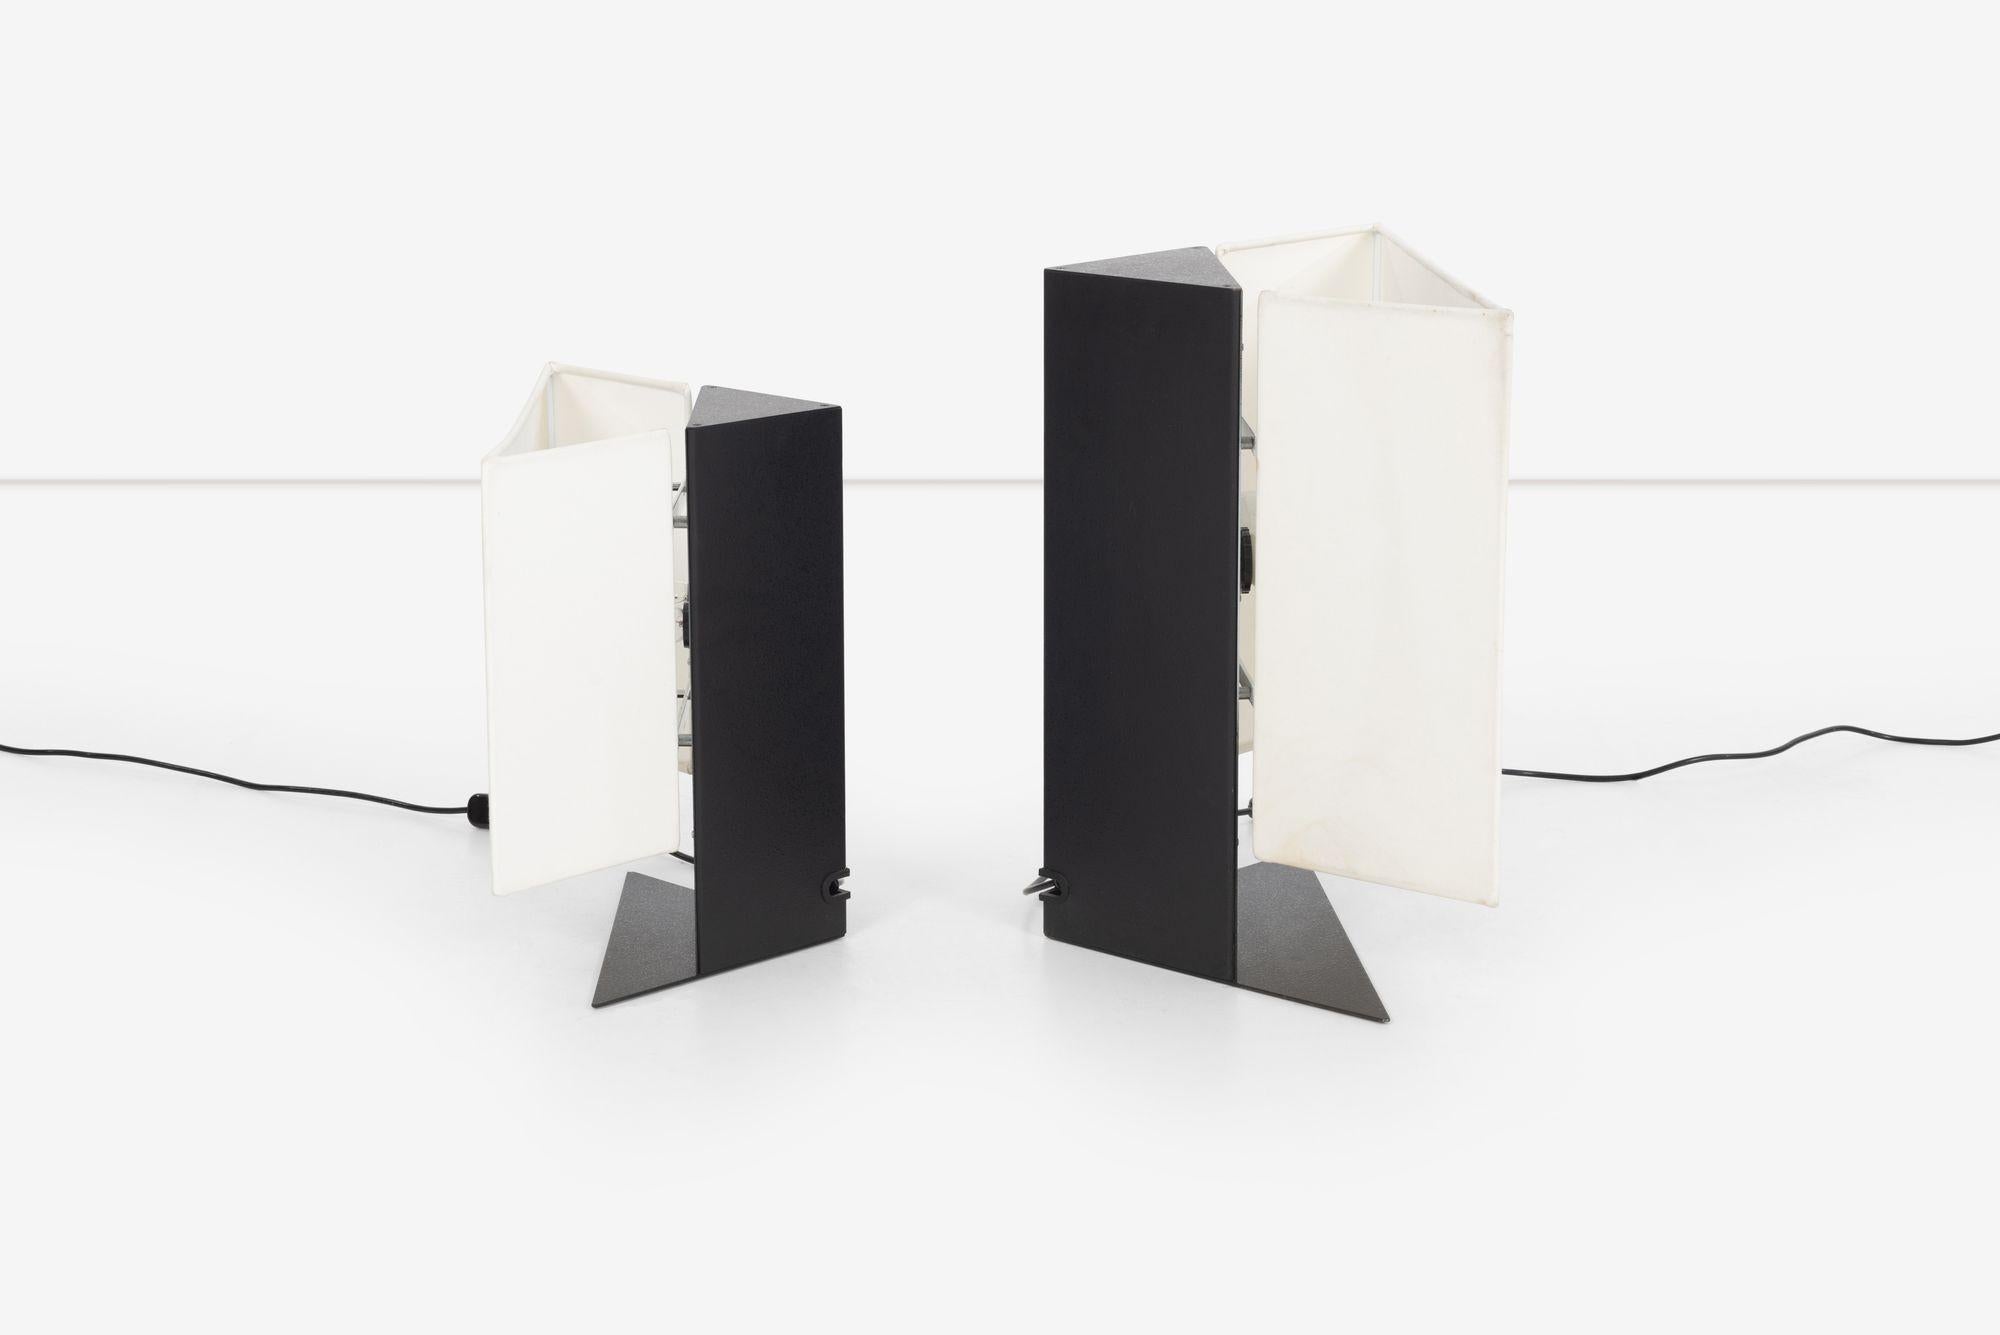 Pair of “Accademia” Table Lamps by Cini Bori for Artemide, 1970's In Good Condition For Sale In Chicago, IL